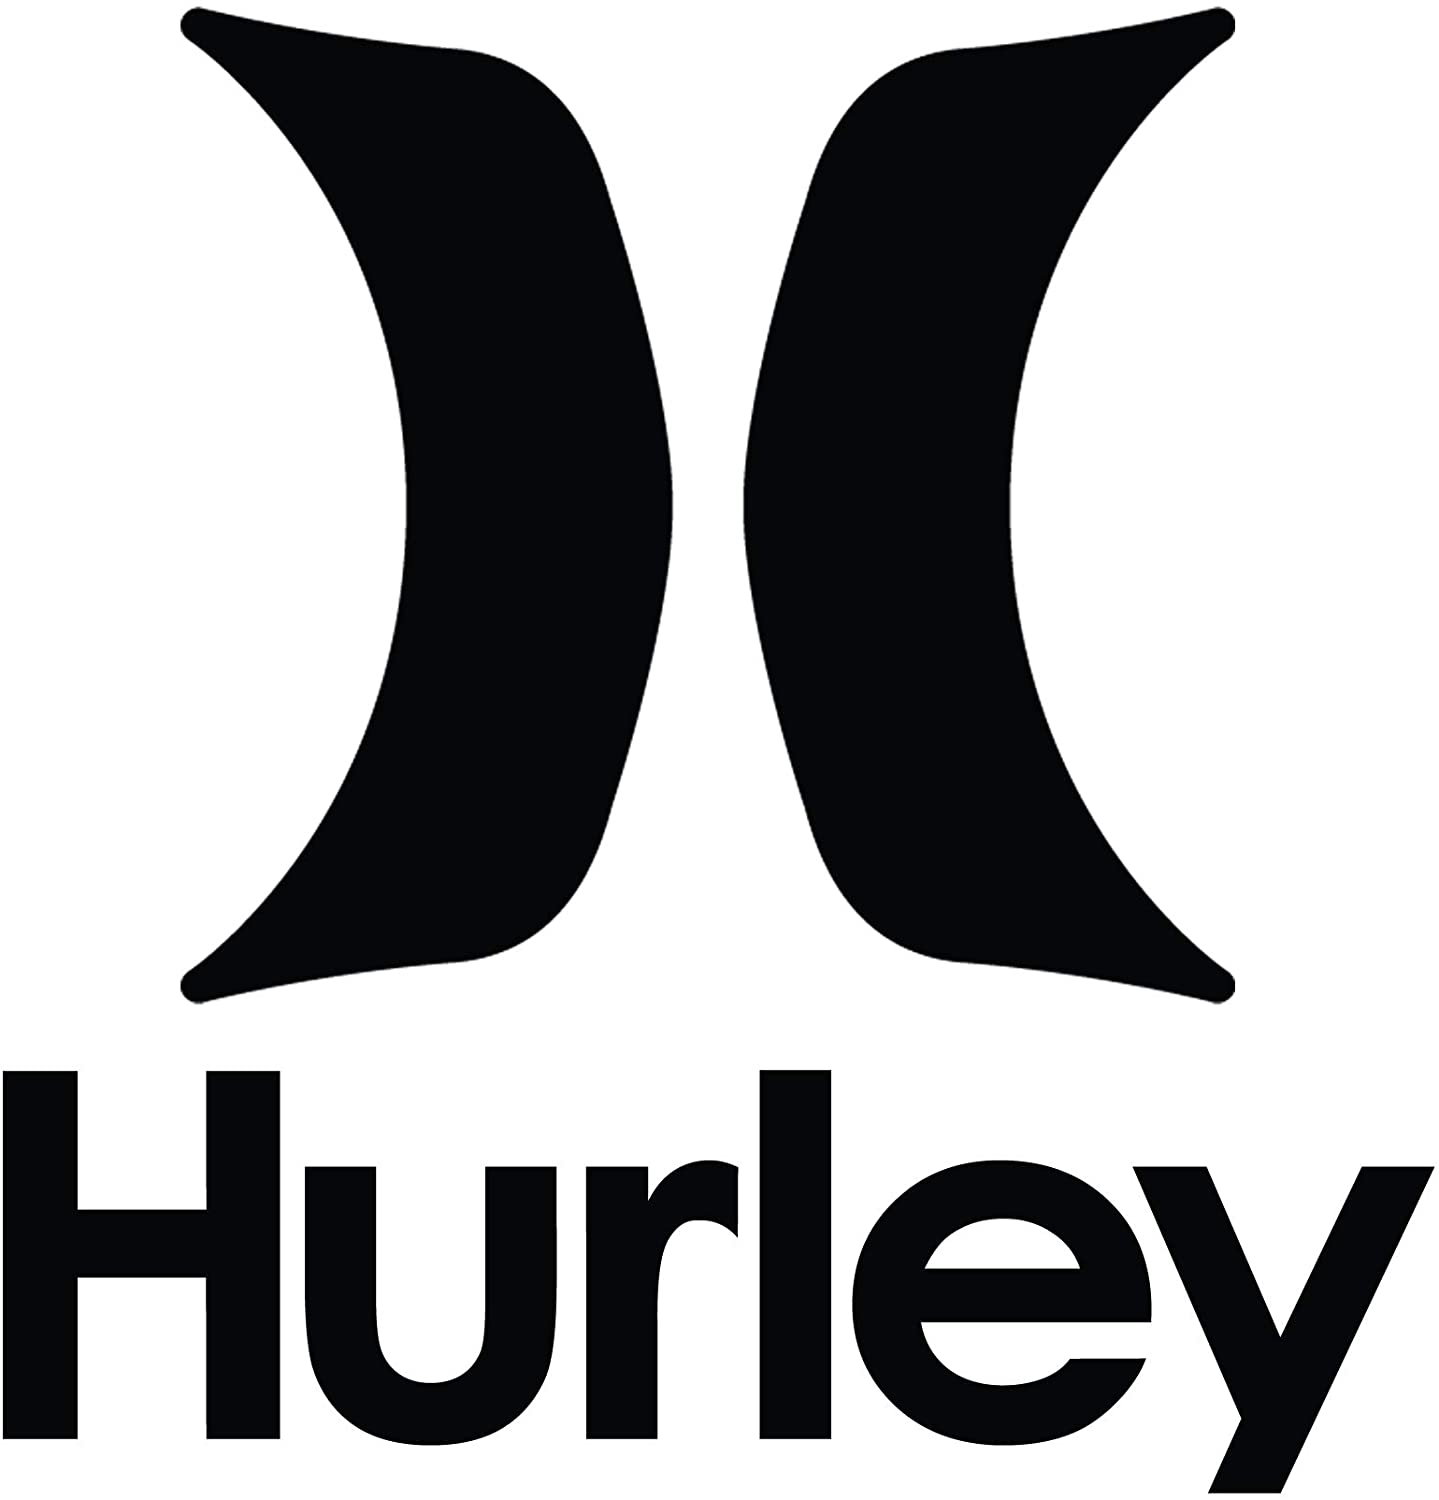 Hurley Grey Icon Classic and Black Icon Cuffed Men's Beanie (2 Pack)